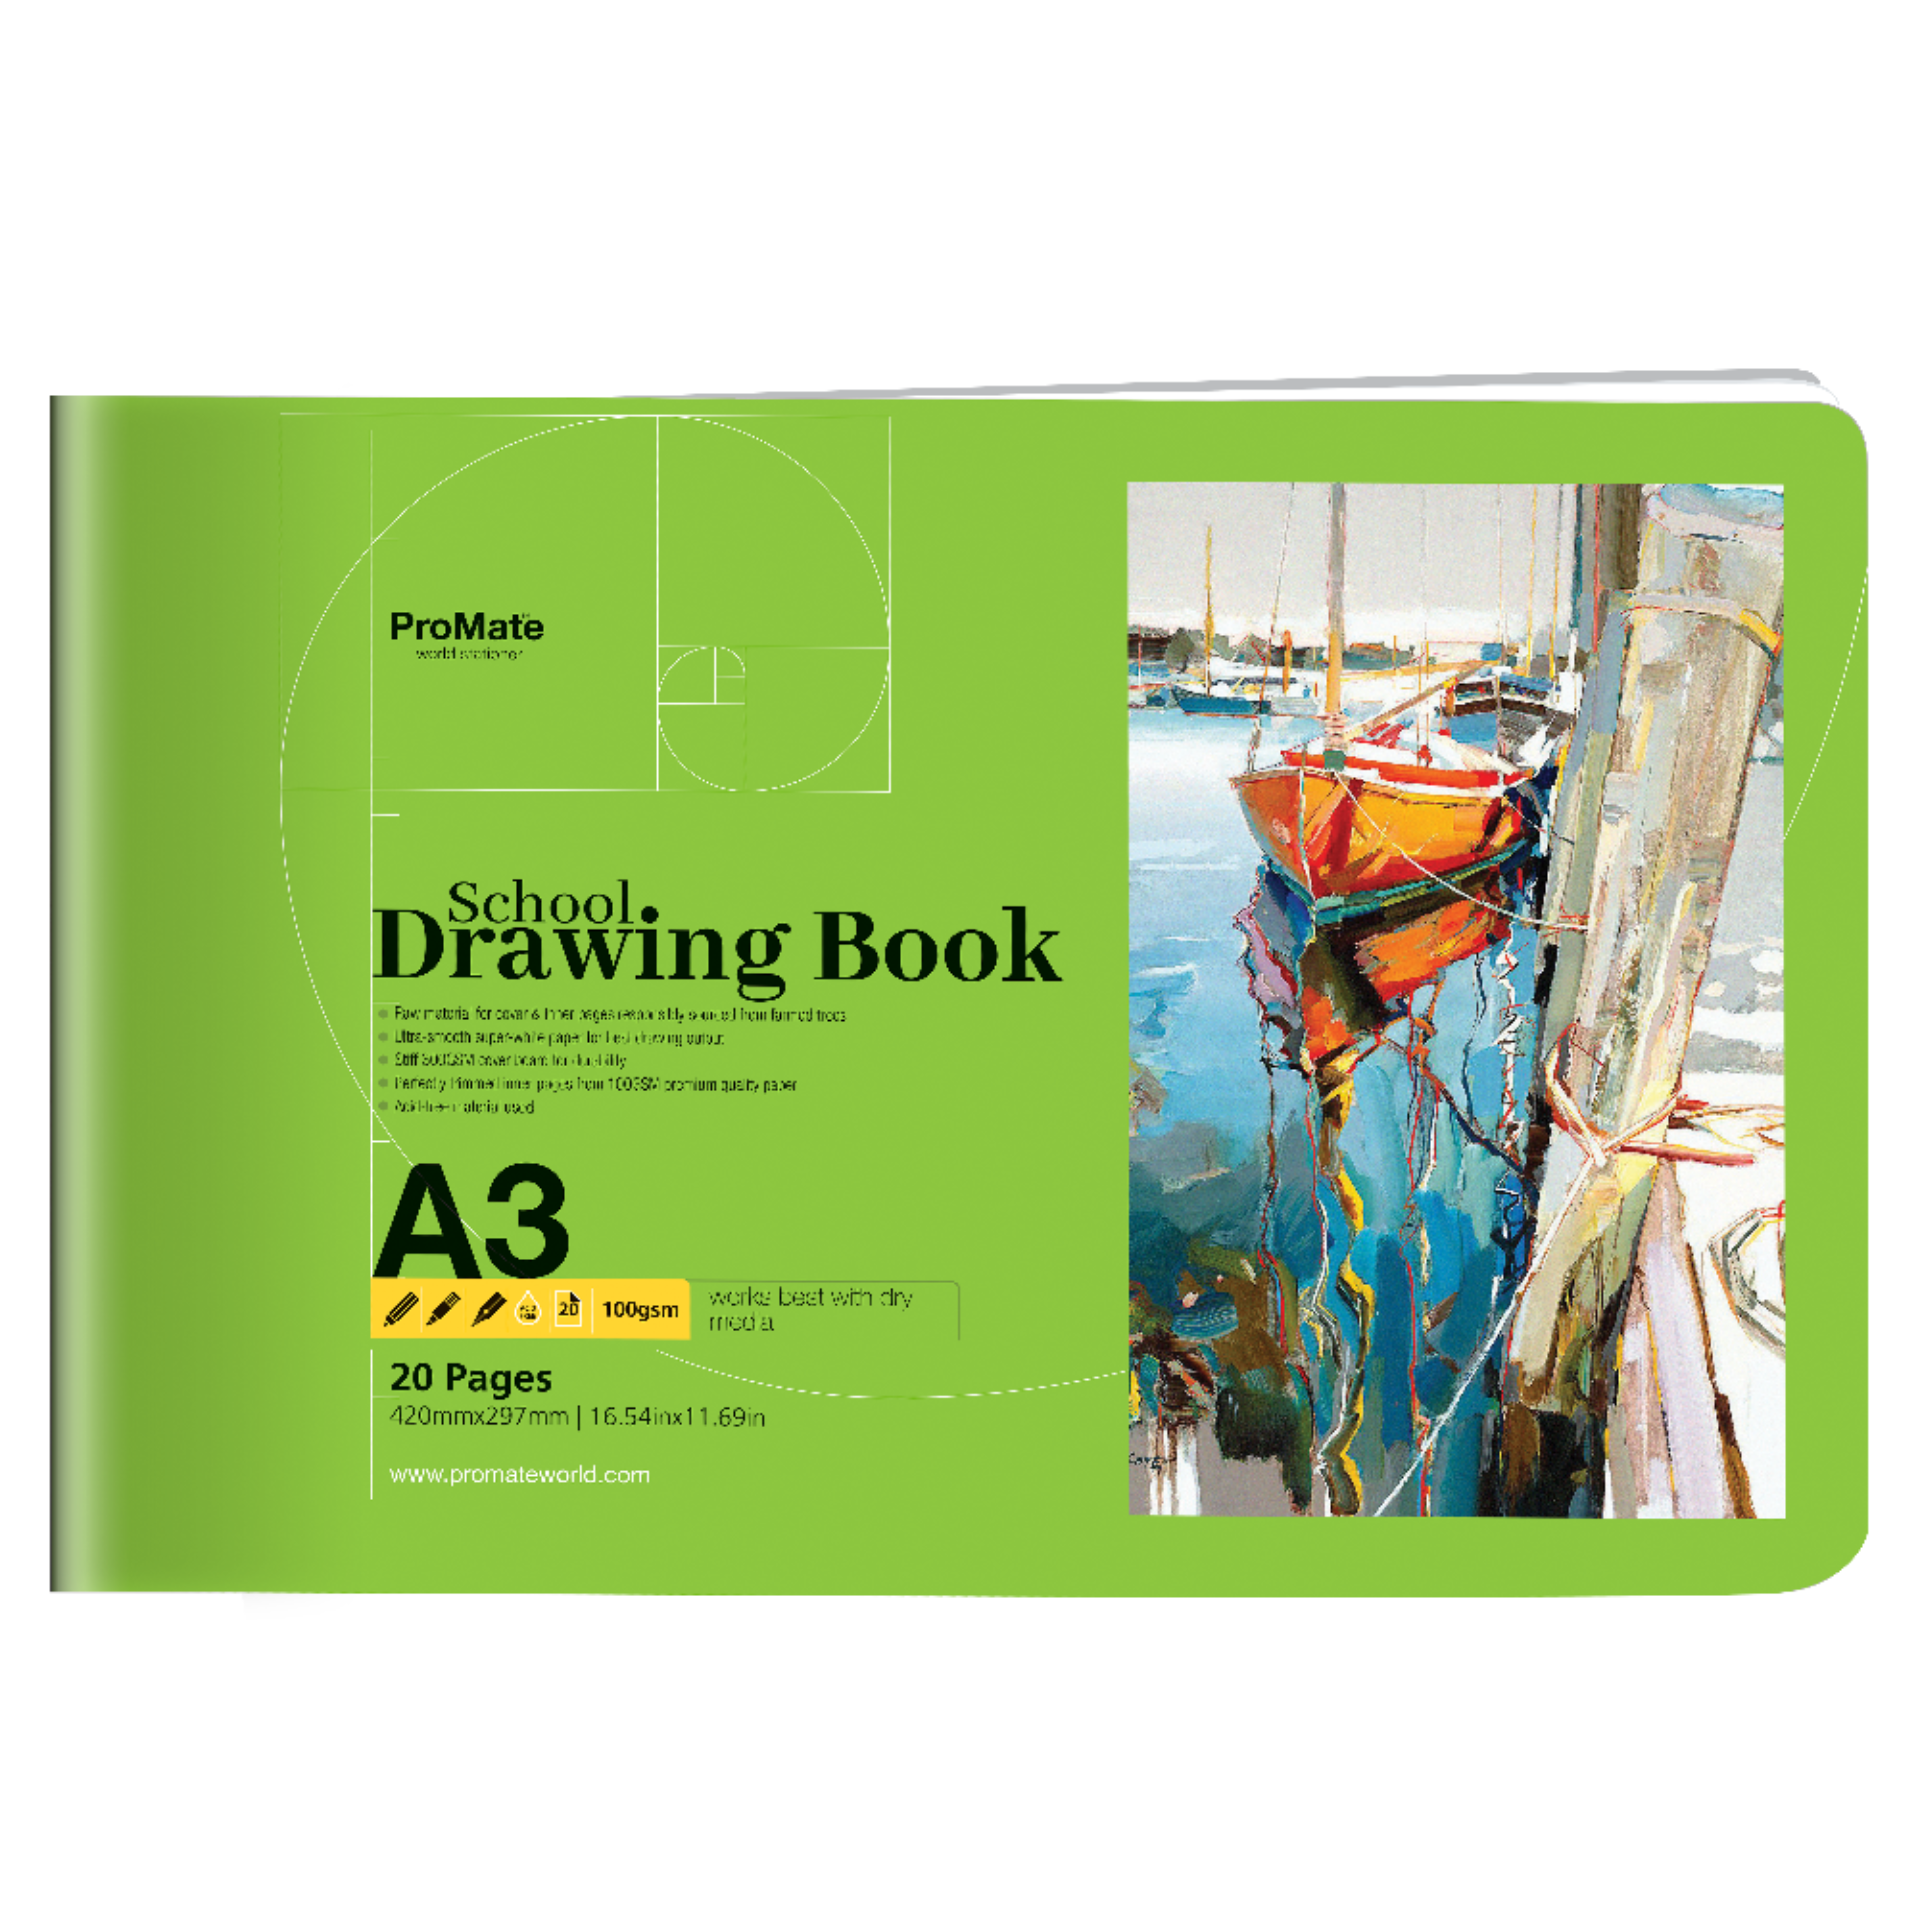 Promate School Drawing Book A3 20 Pages 